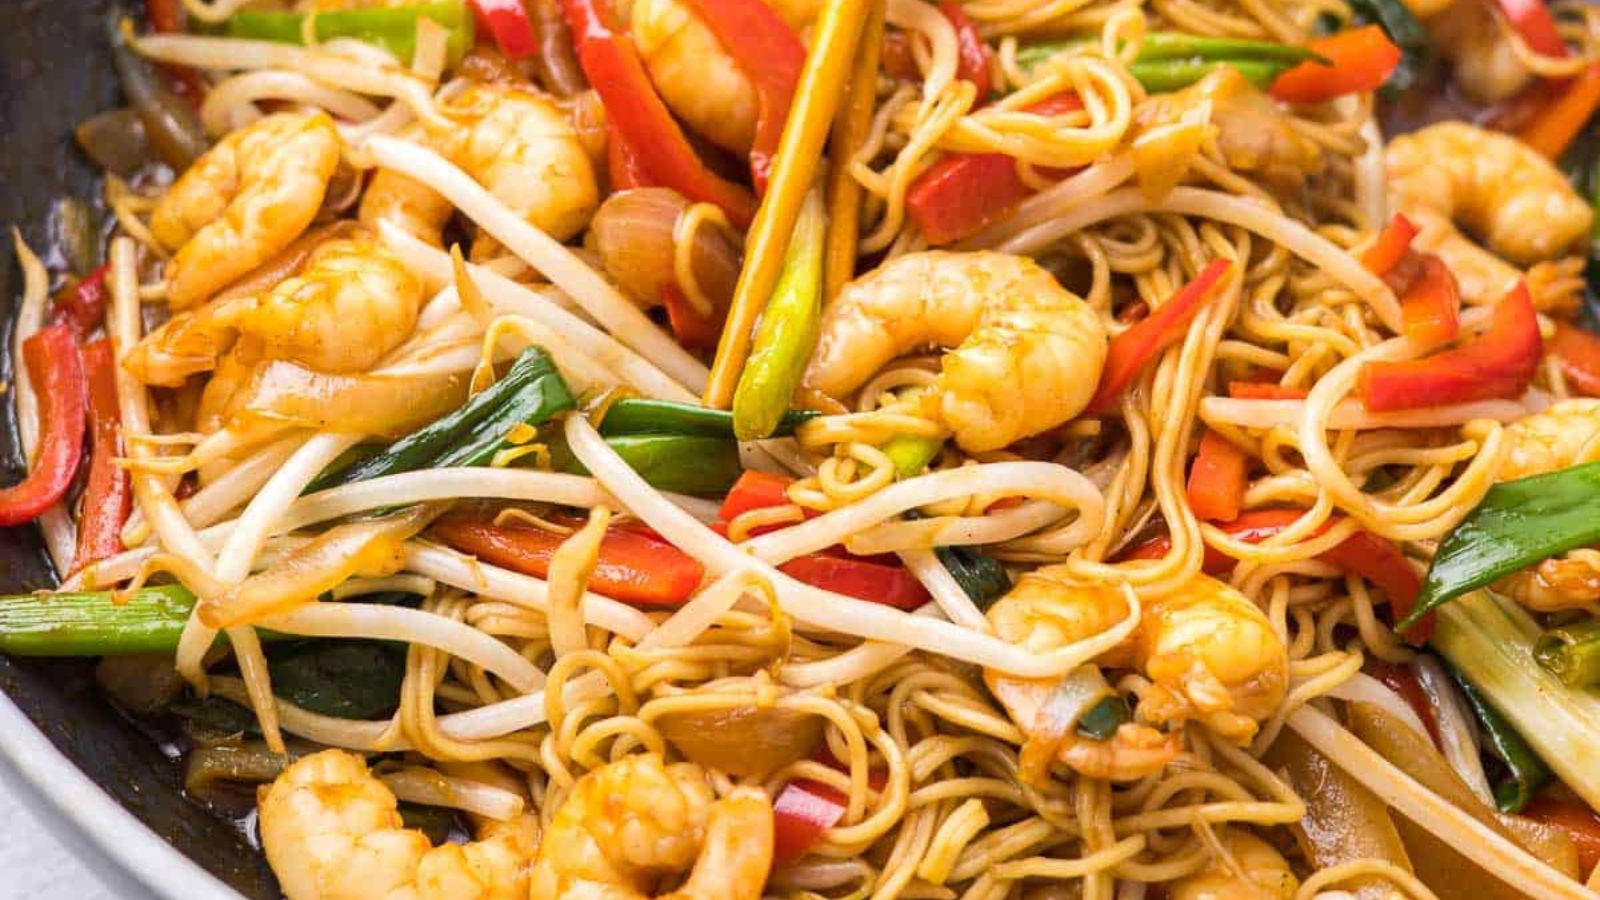 Experience Healthy Living with 24 Spectacular Asian-Inspired Recipes